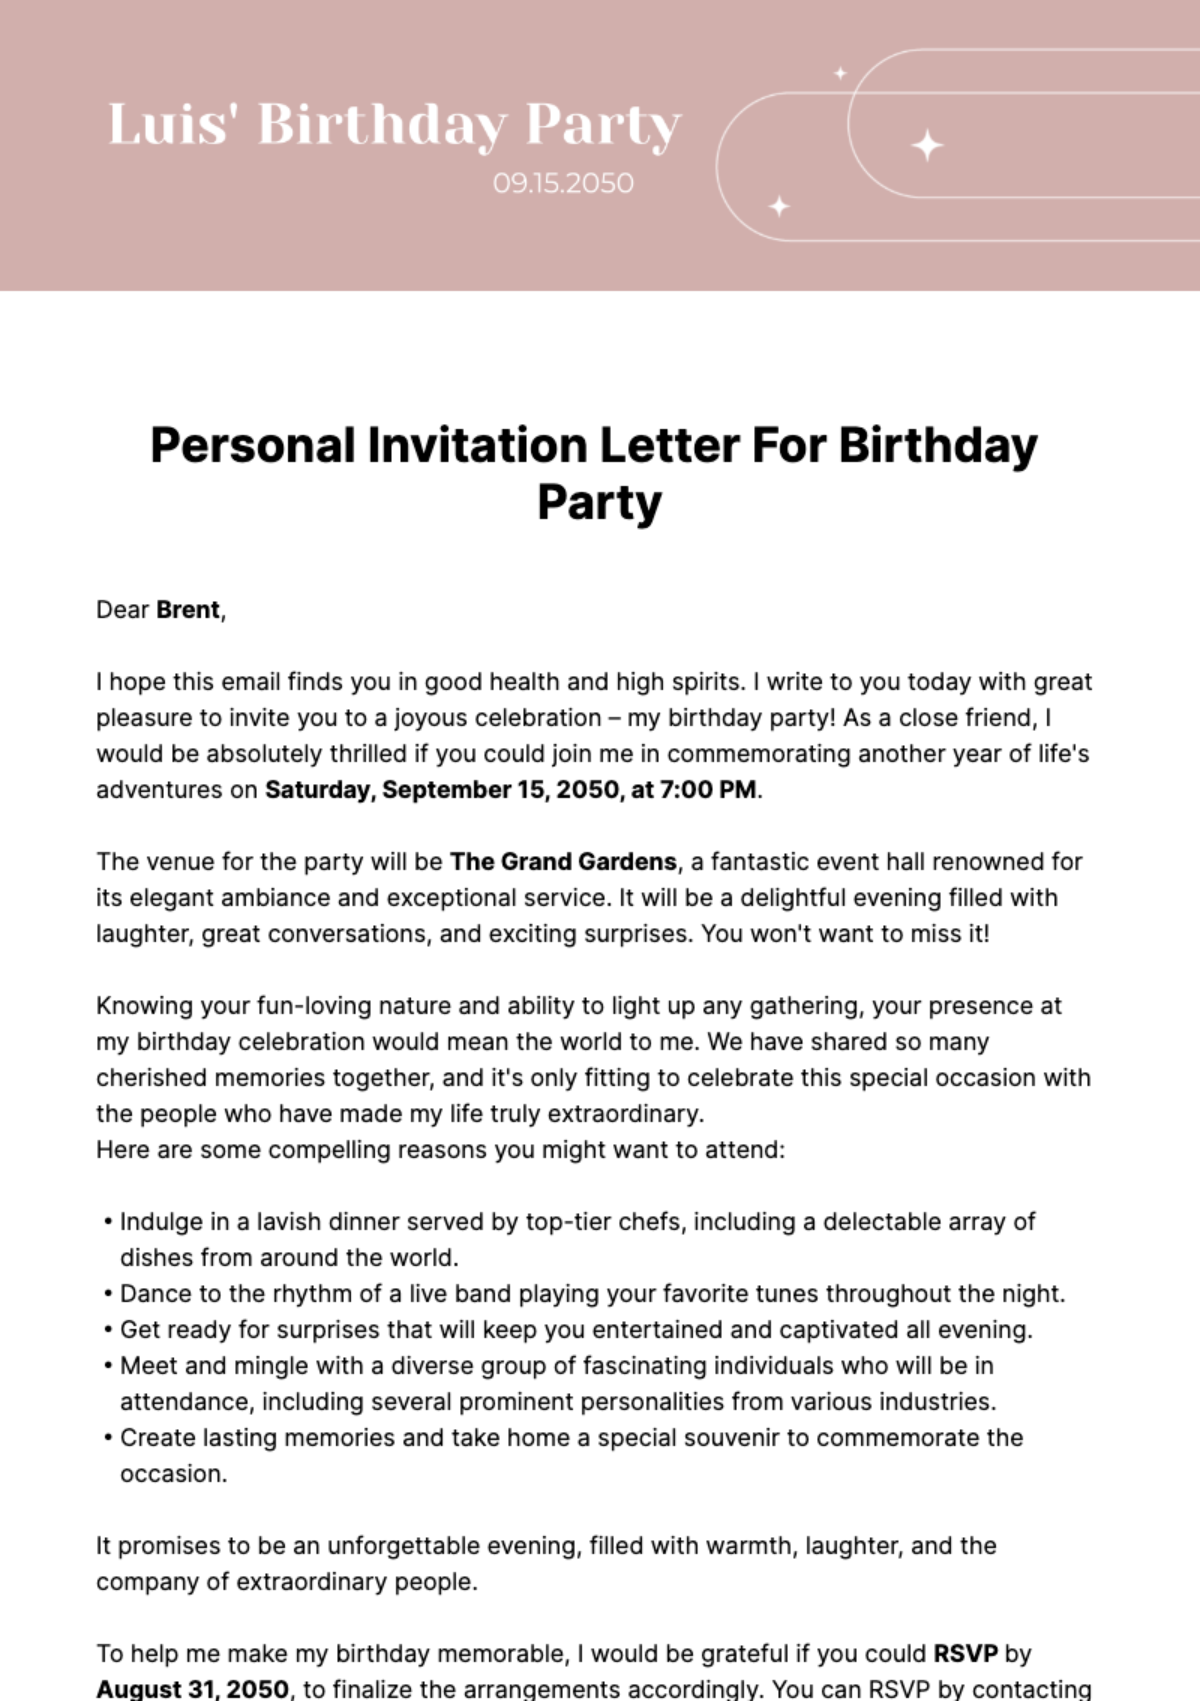 Free Personal Invitation Letter for Birthday Party  Template